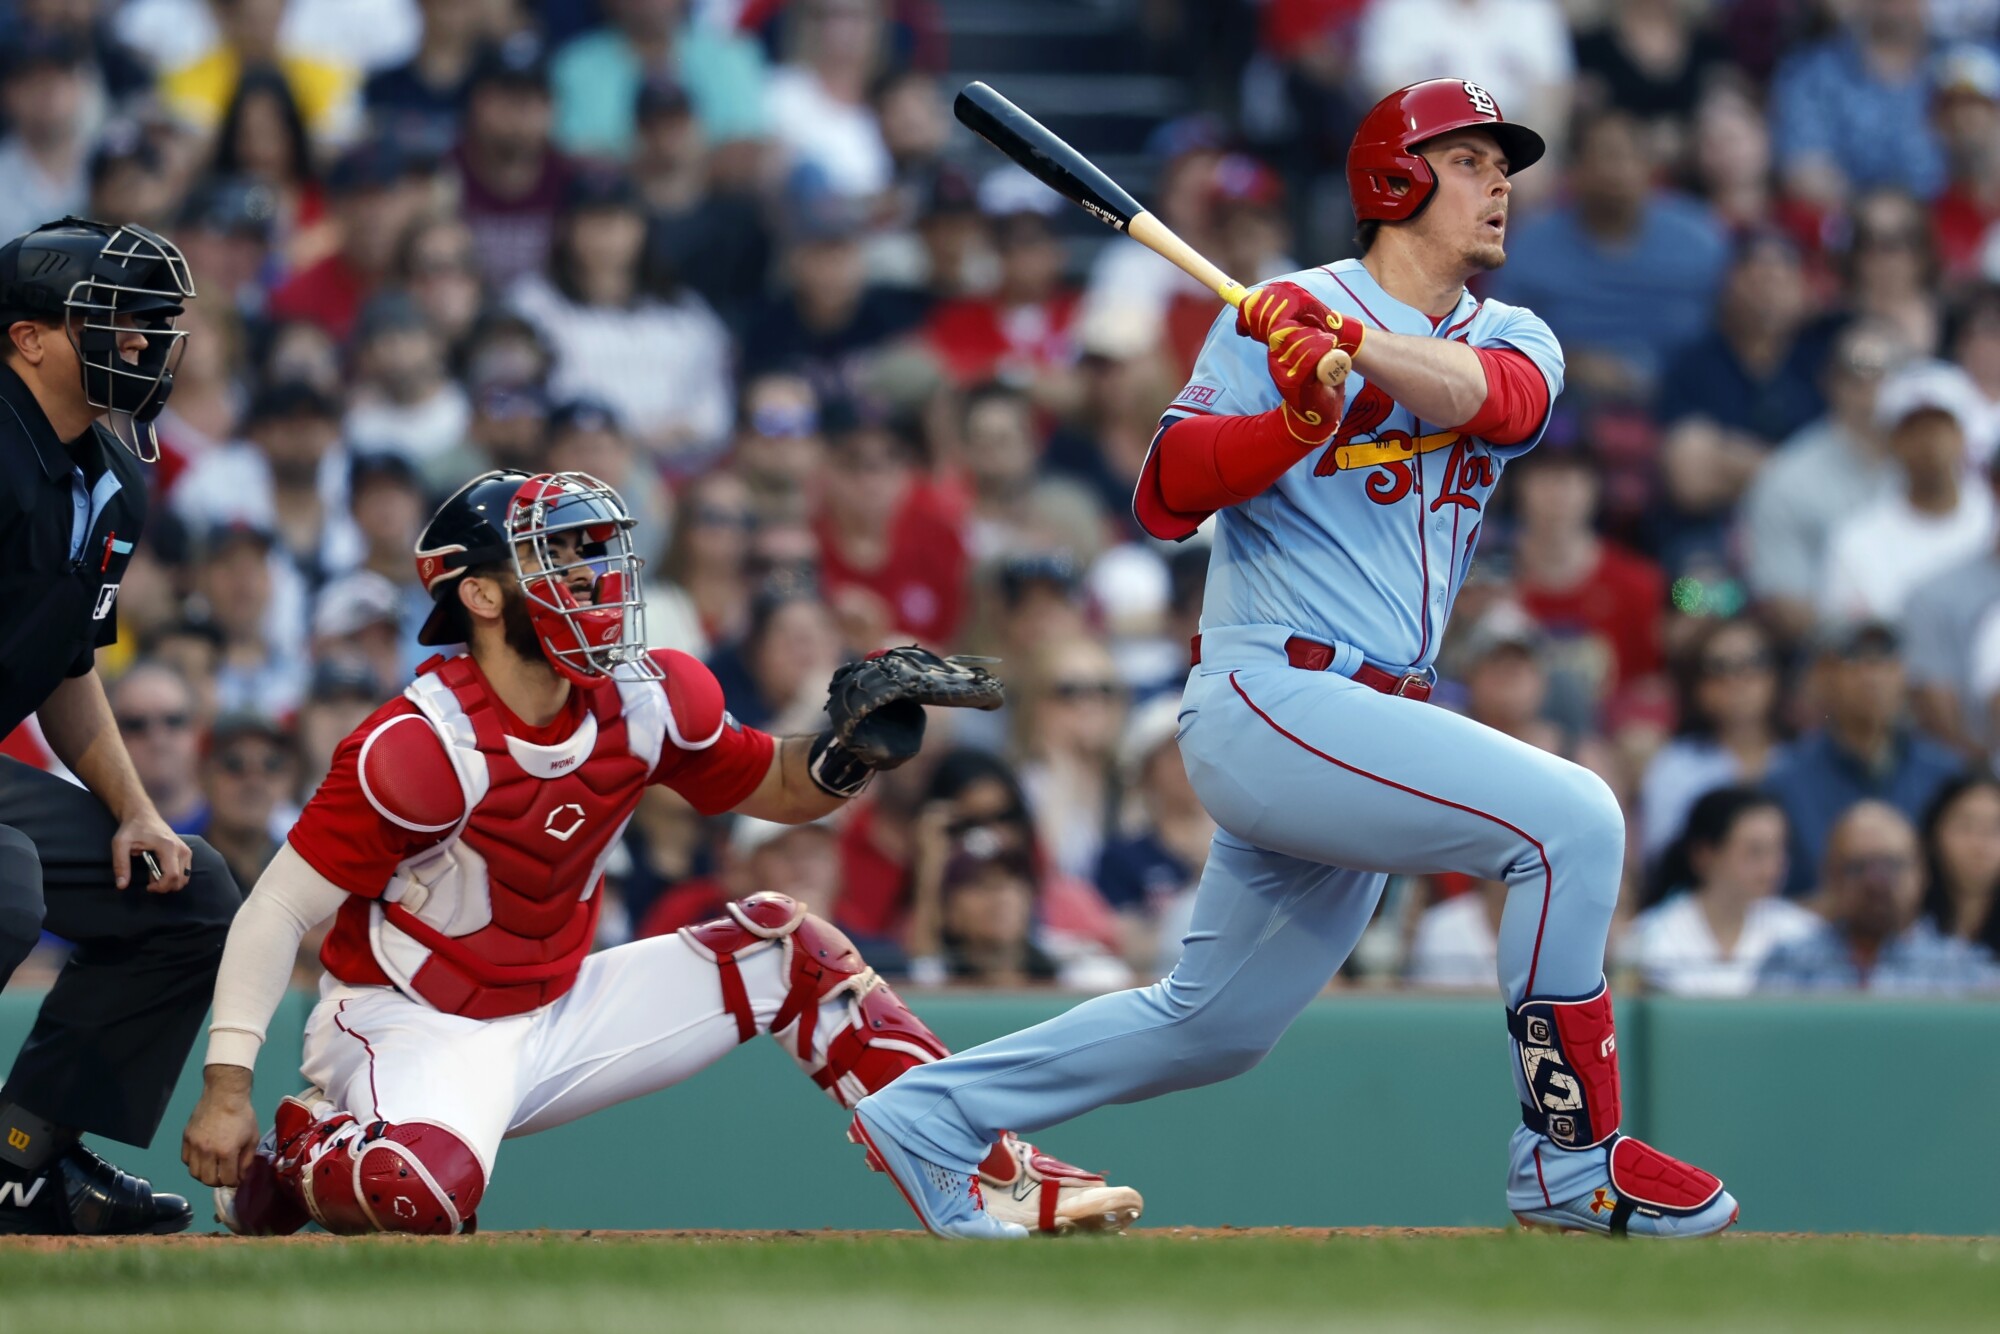 Cardinals beat Red Sox 4-3 as Jansen blows 9th inning lead for 2nd